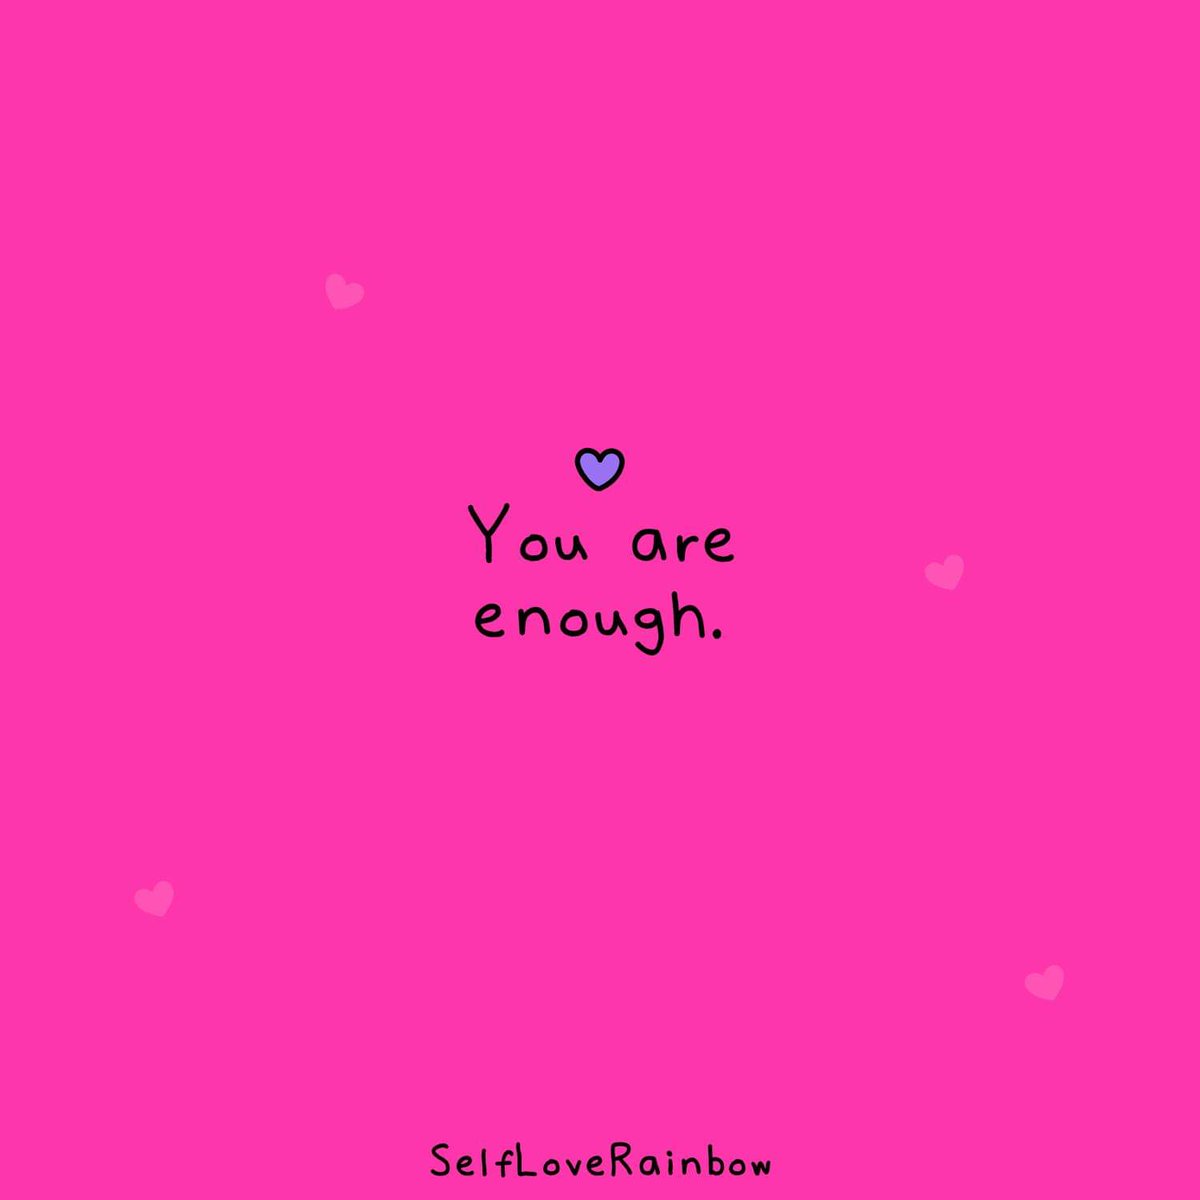 No matter what anyone else says, know that you are enough just as you are. Keep being true to yourself and never let anyone dim your light. 💖🌸💕
#selflove #youareamazing